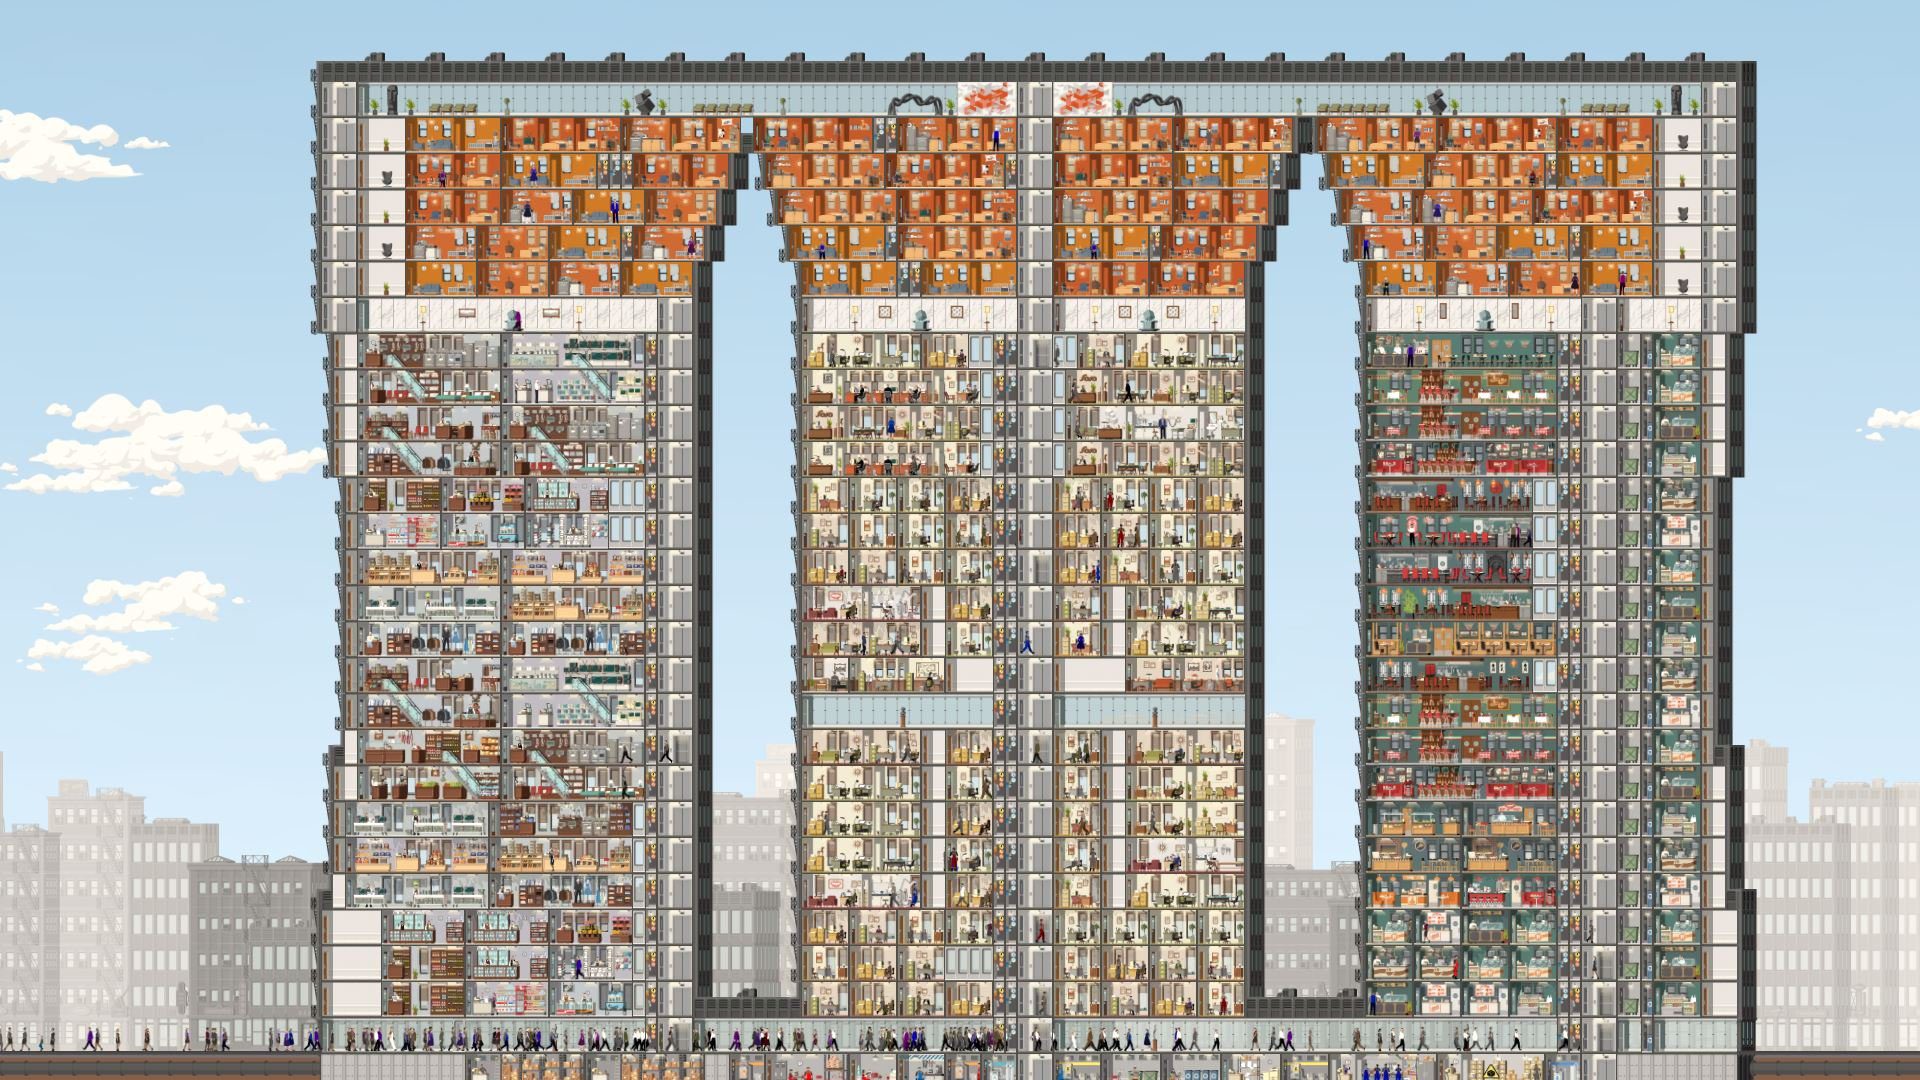 Project Highrise: Architect’s Edition comes to consoles this November